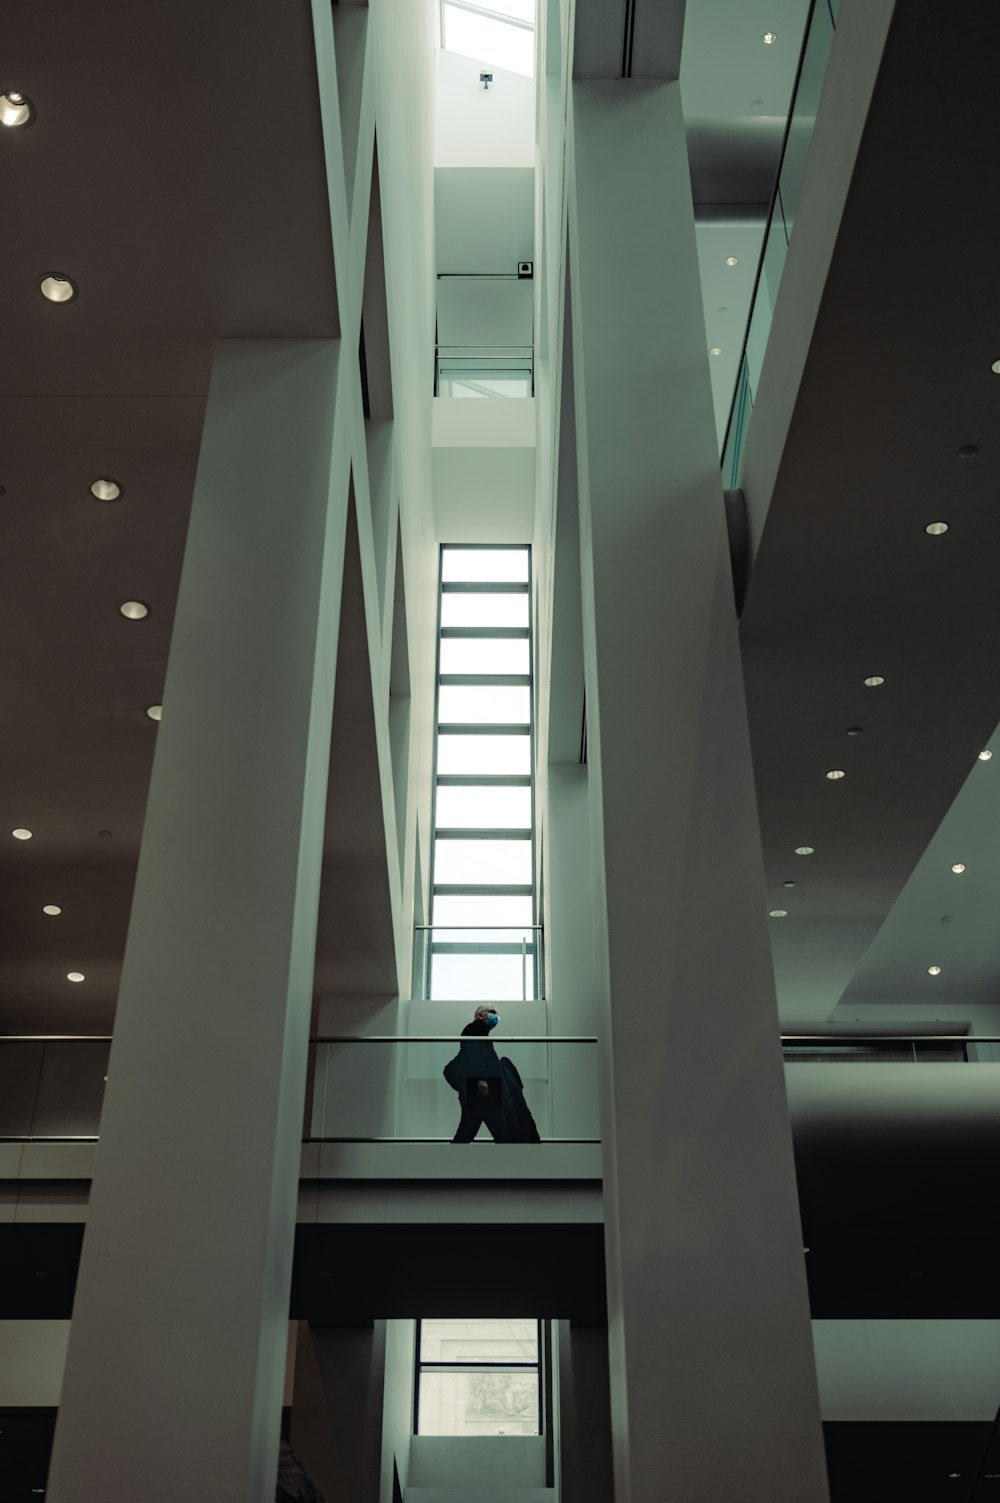 a person sitting on a ledge in a building